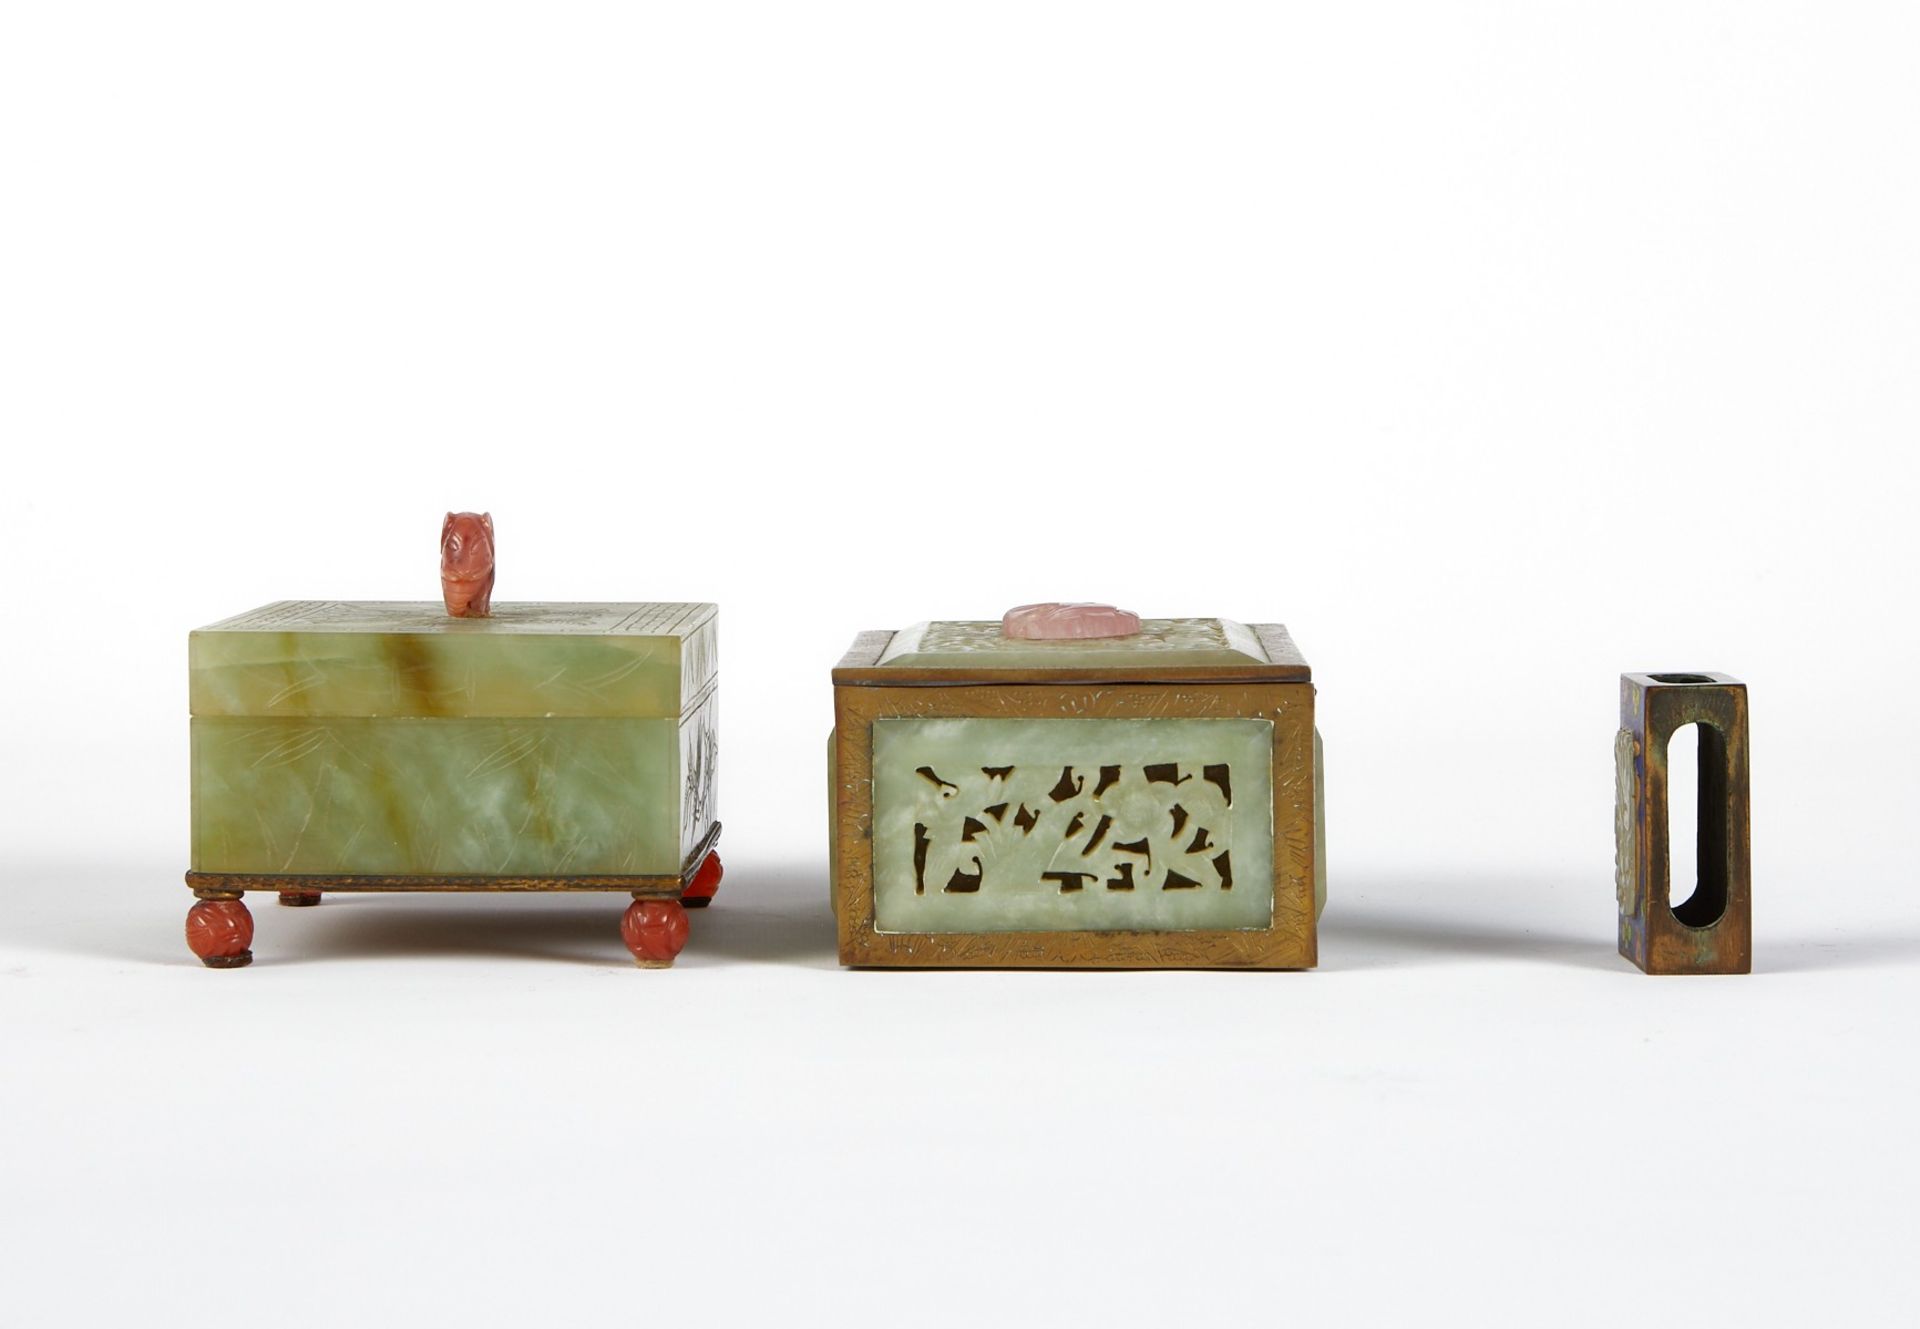 Grp: 3 Small Jade Stone Boxes - Image 4 of 11